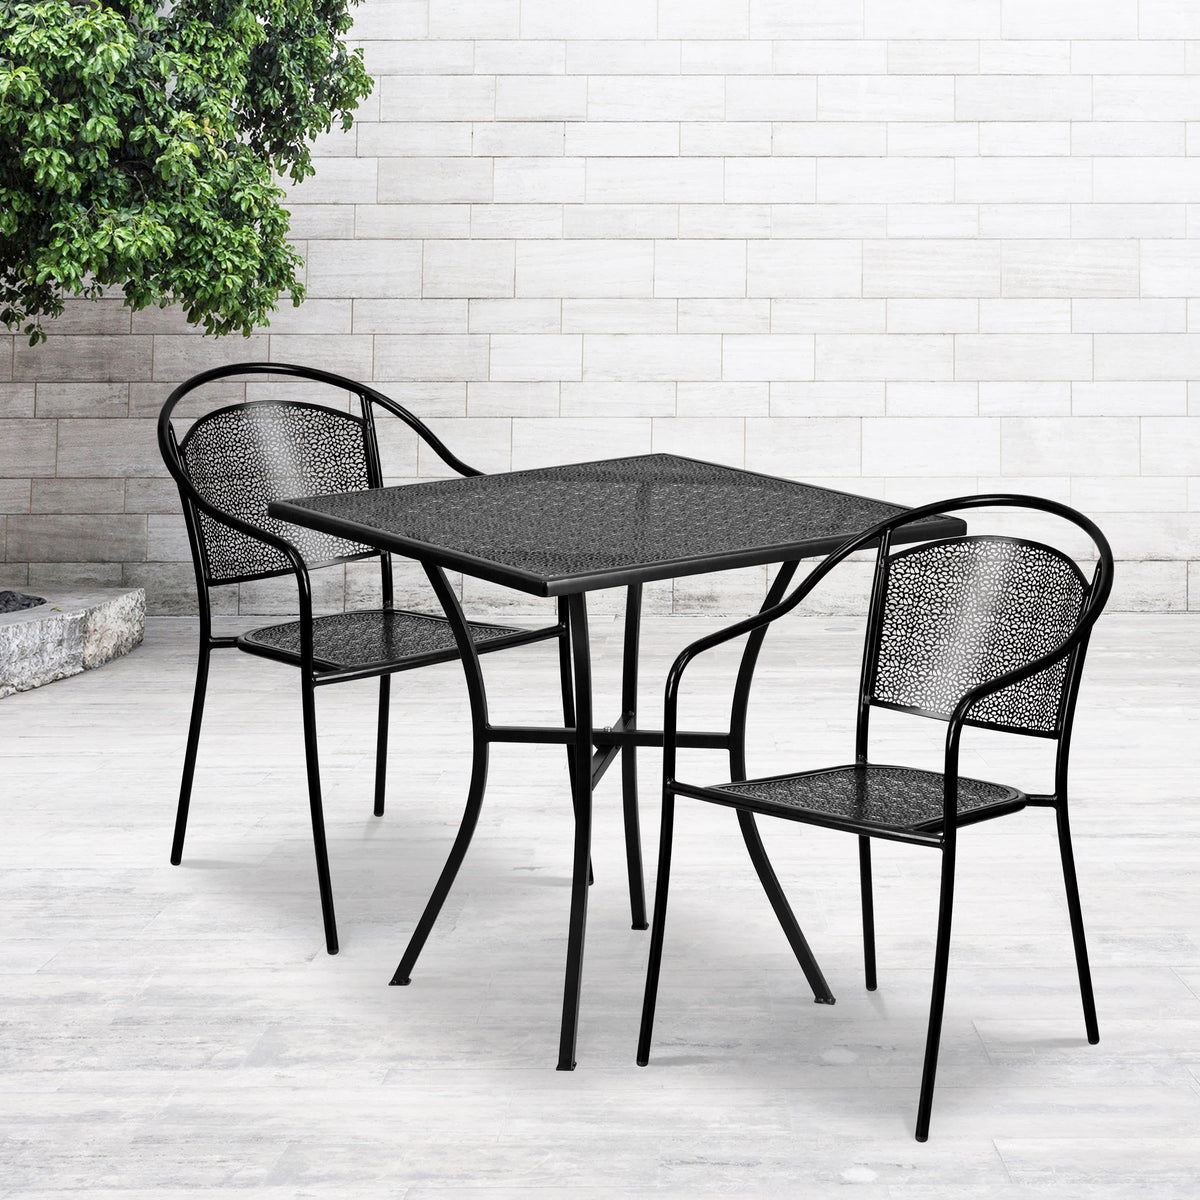 Black |#| 28inch Square Black Indoor-Outdoor Steel Patio Table Set with 2 Round Back Chairs